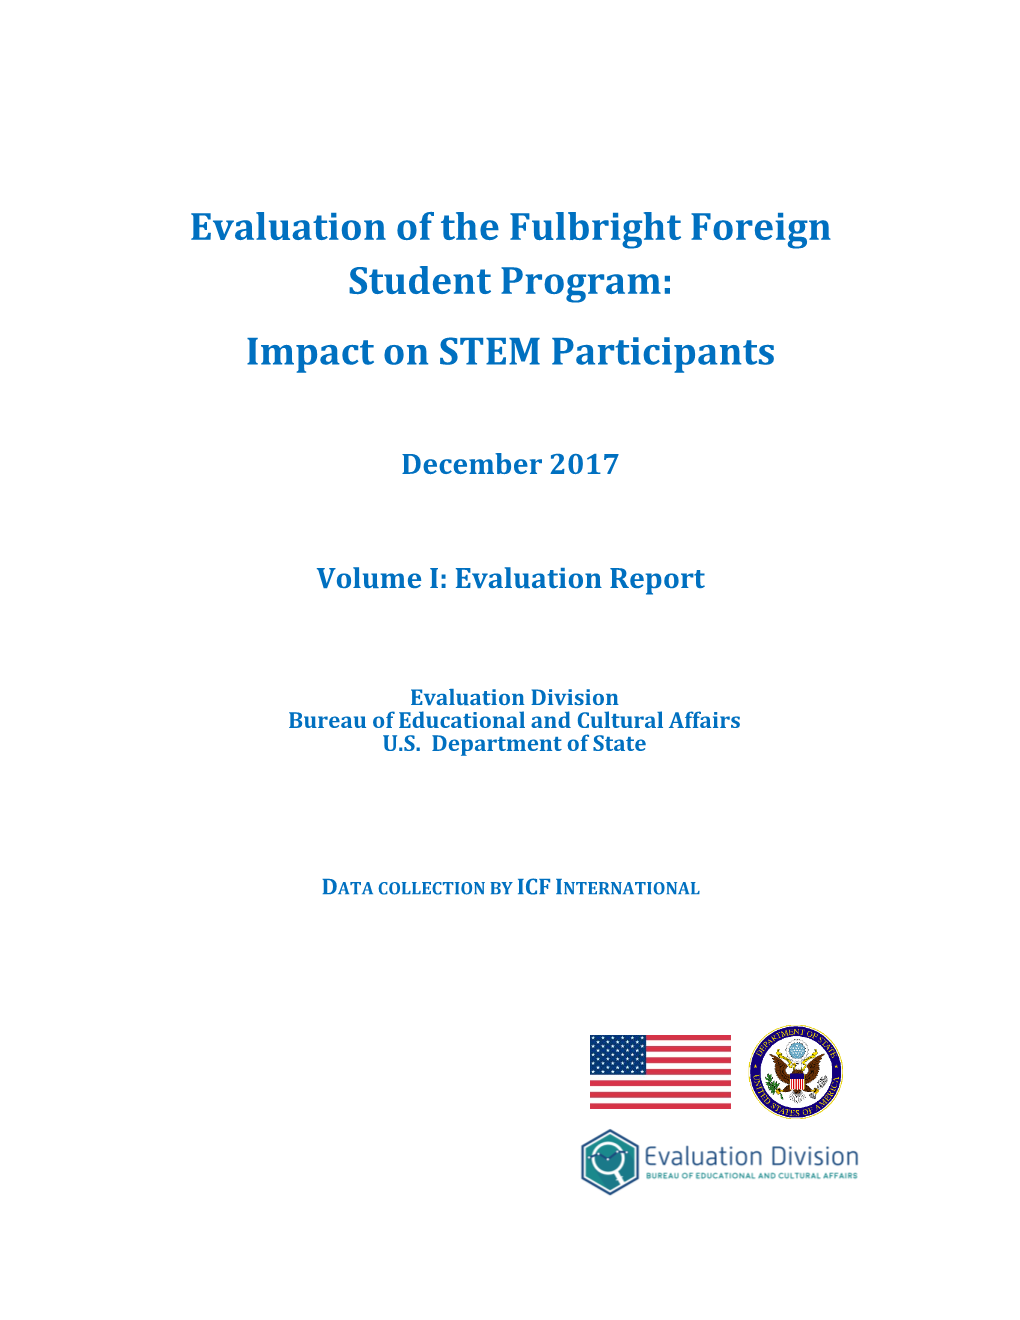 Evaluation of the Fulbright Foreign Student Program: Impact on STEM Participants